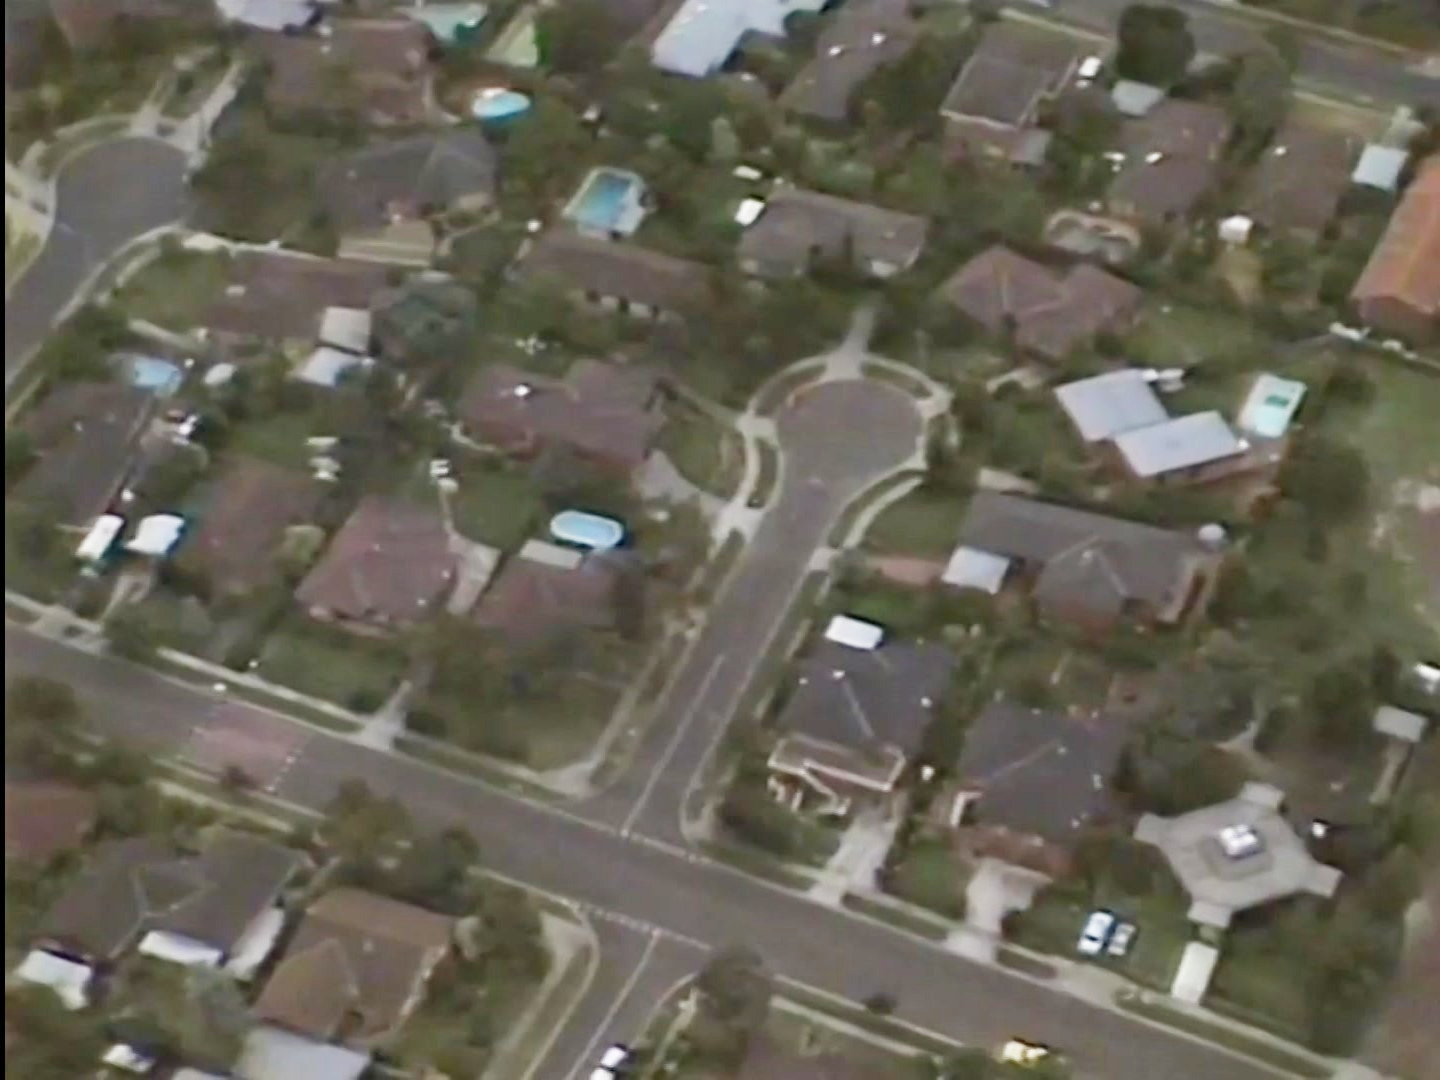 An aerial shot of a suburban street from the 80s.